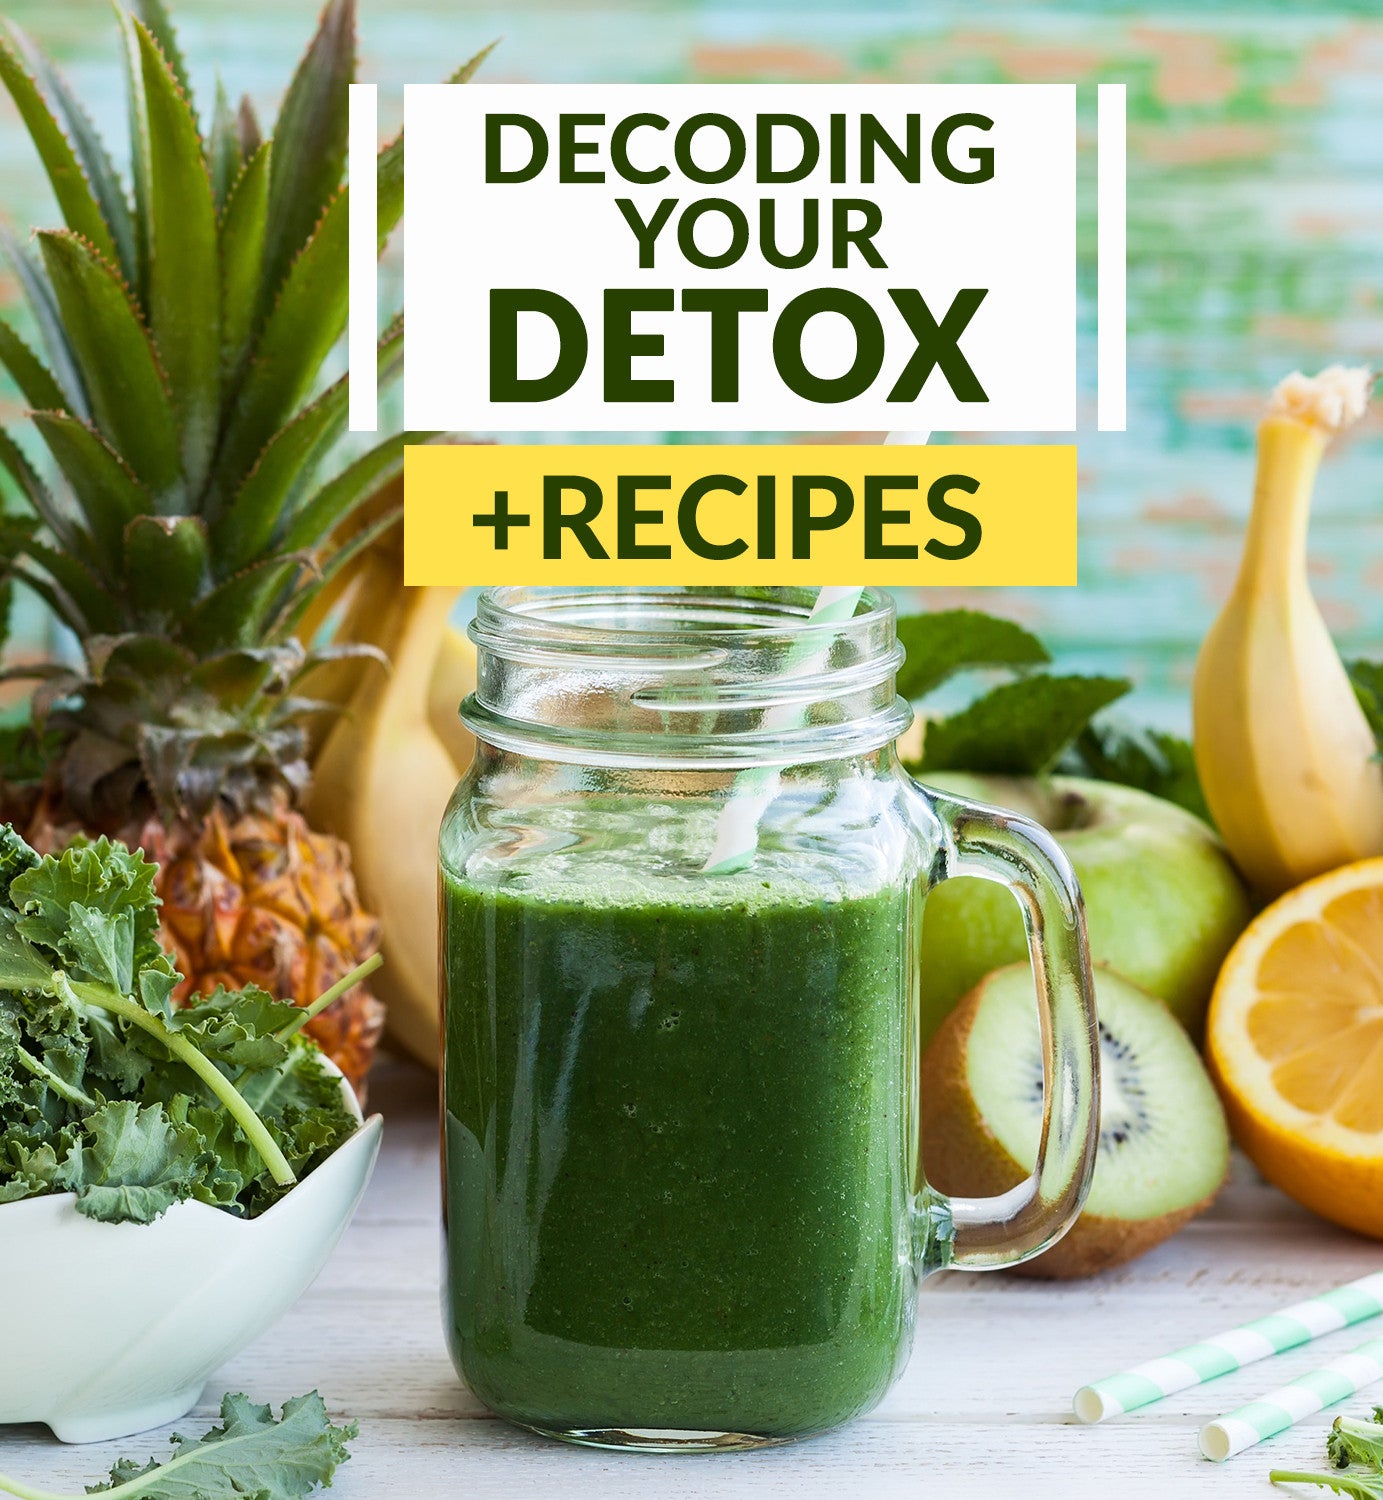 Decoding Your Detox - Tips, Tricks and Recipes Included